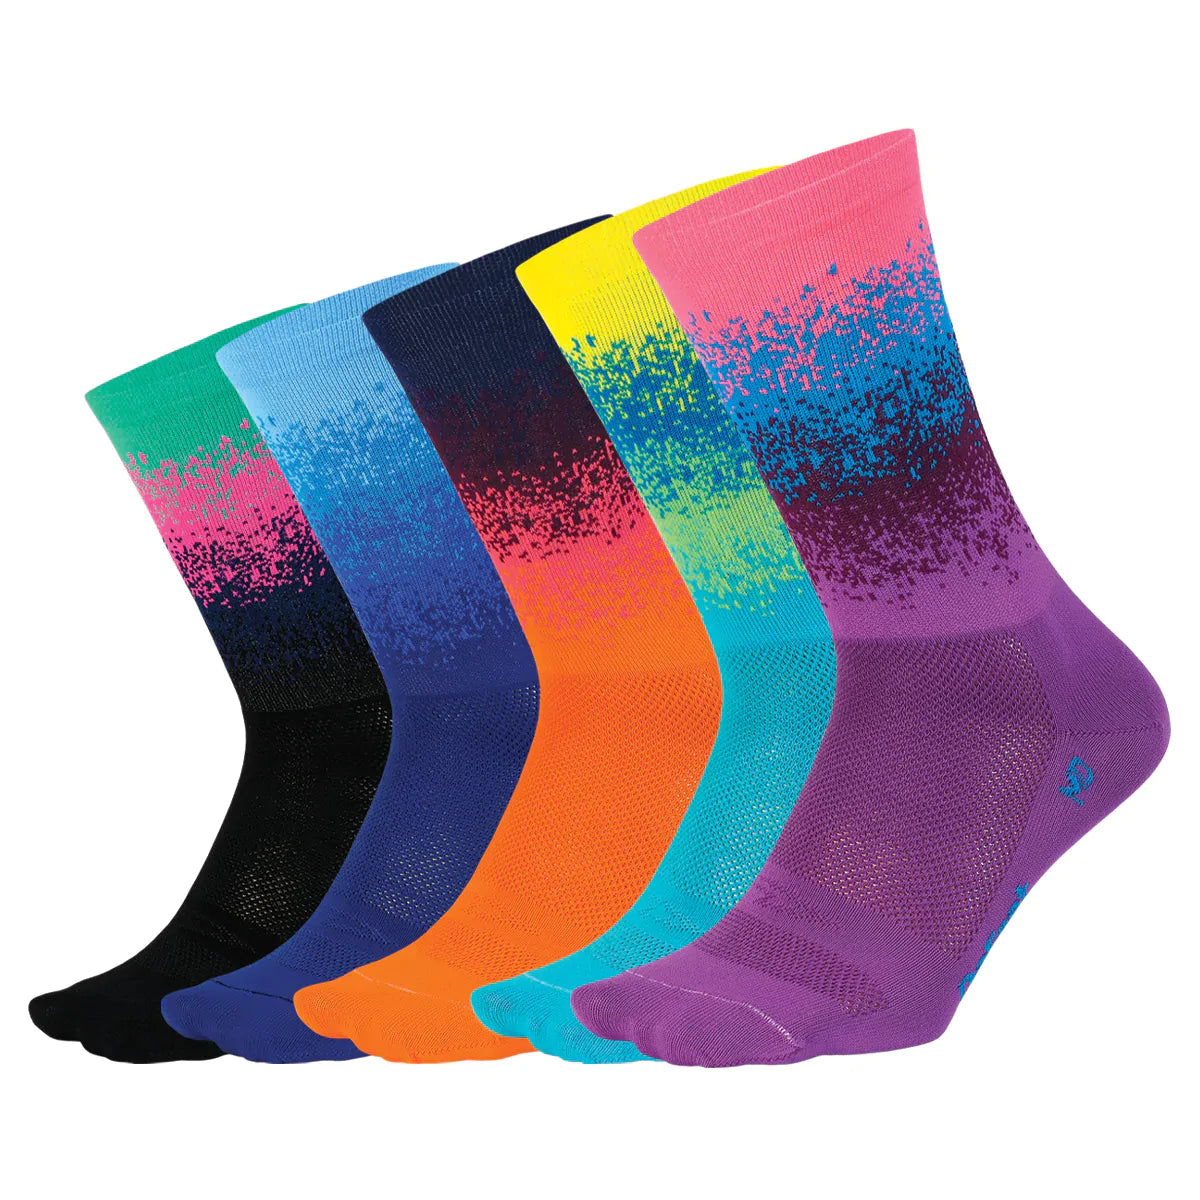 5 DeFeet Aireator Barnstormer Ombre cycling socks features a 6" cuff and a design of several different bands of color fading into each other.